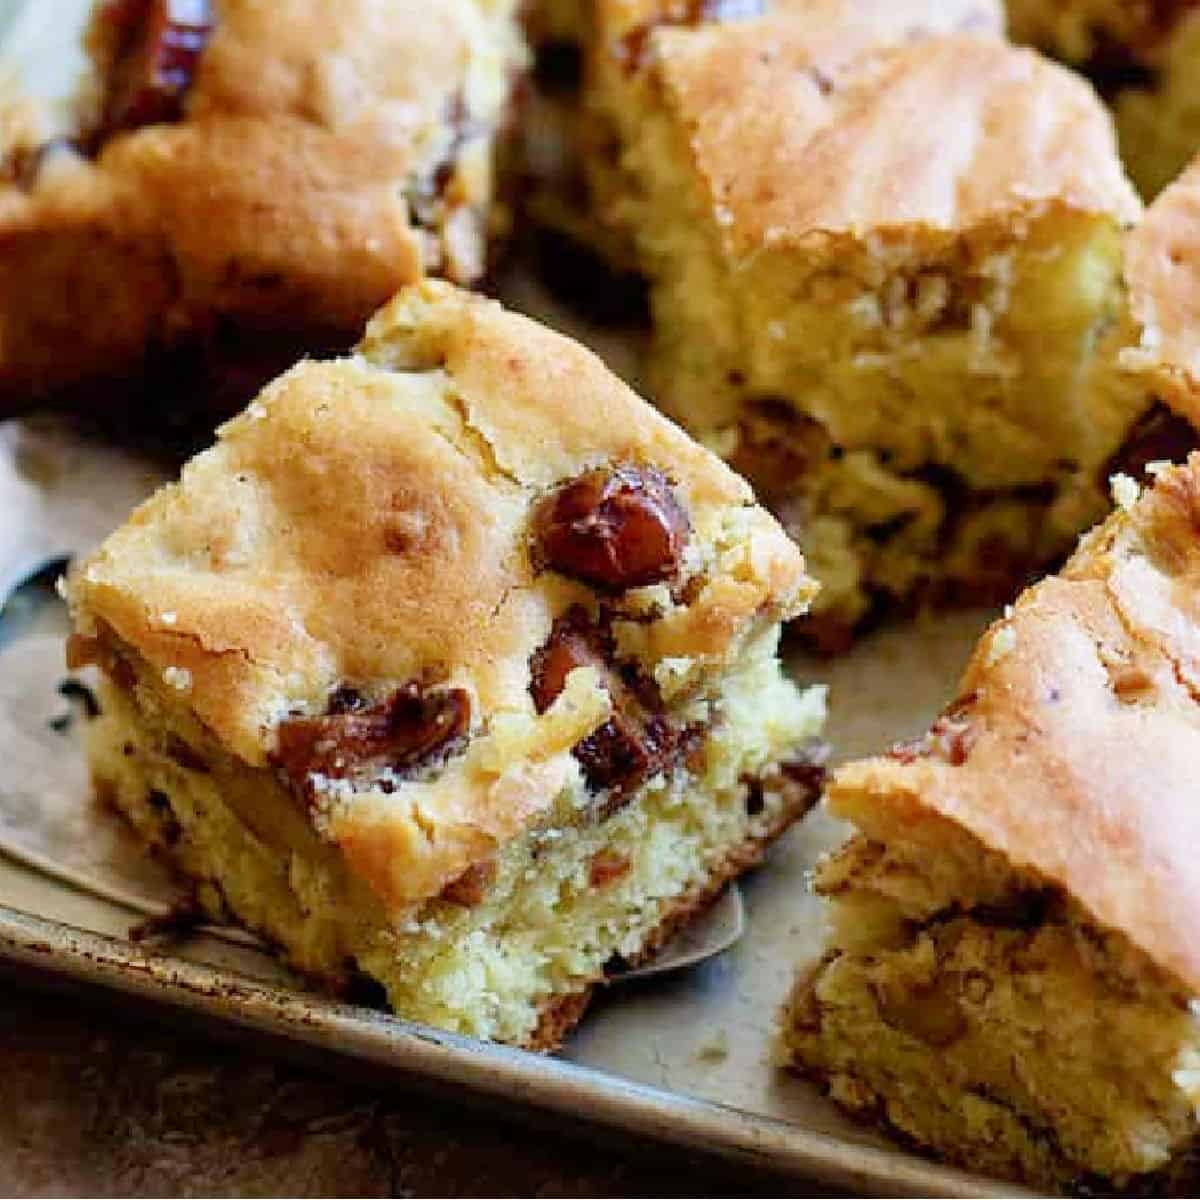 Date cake with walnuts is a delicious mid-day snack. Lightly sweetened with chunks of walnuts and dates, this cake is perfect with a cup of tea!
